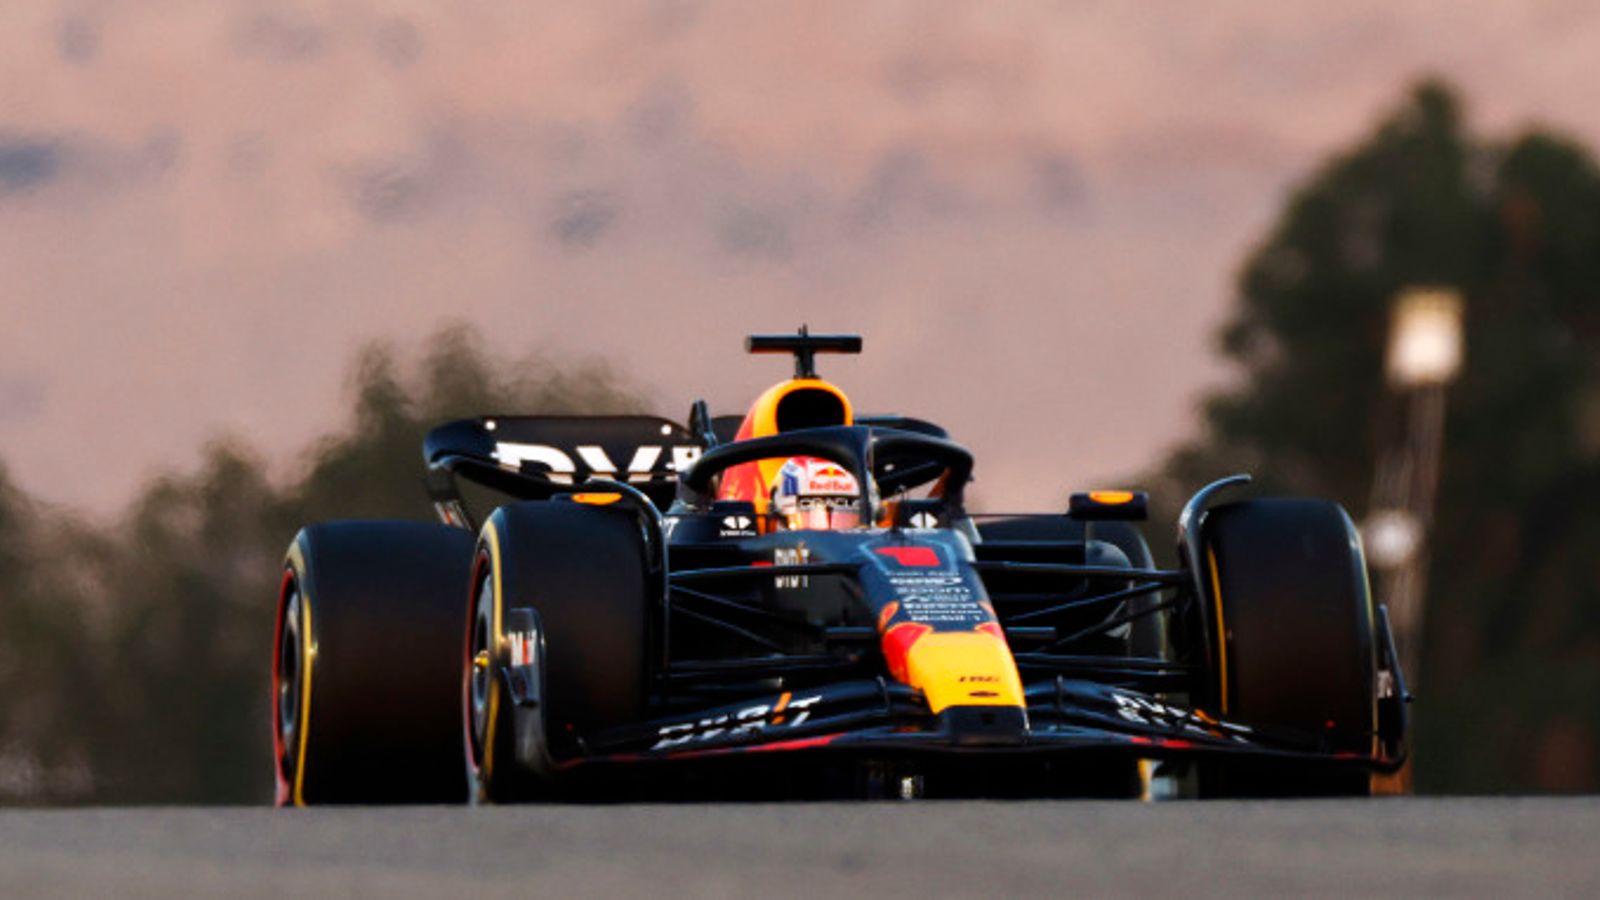 Formula 1 2023: Sky Sports F1 team preview season by answering key questions ahead of Bahrain GP